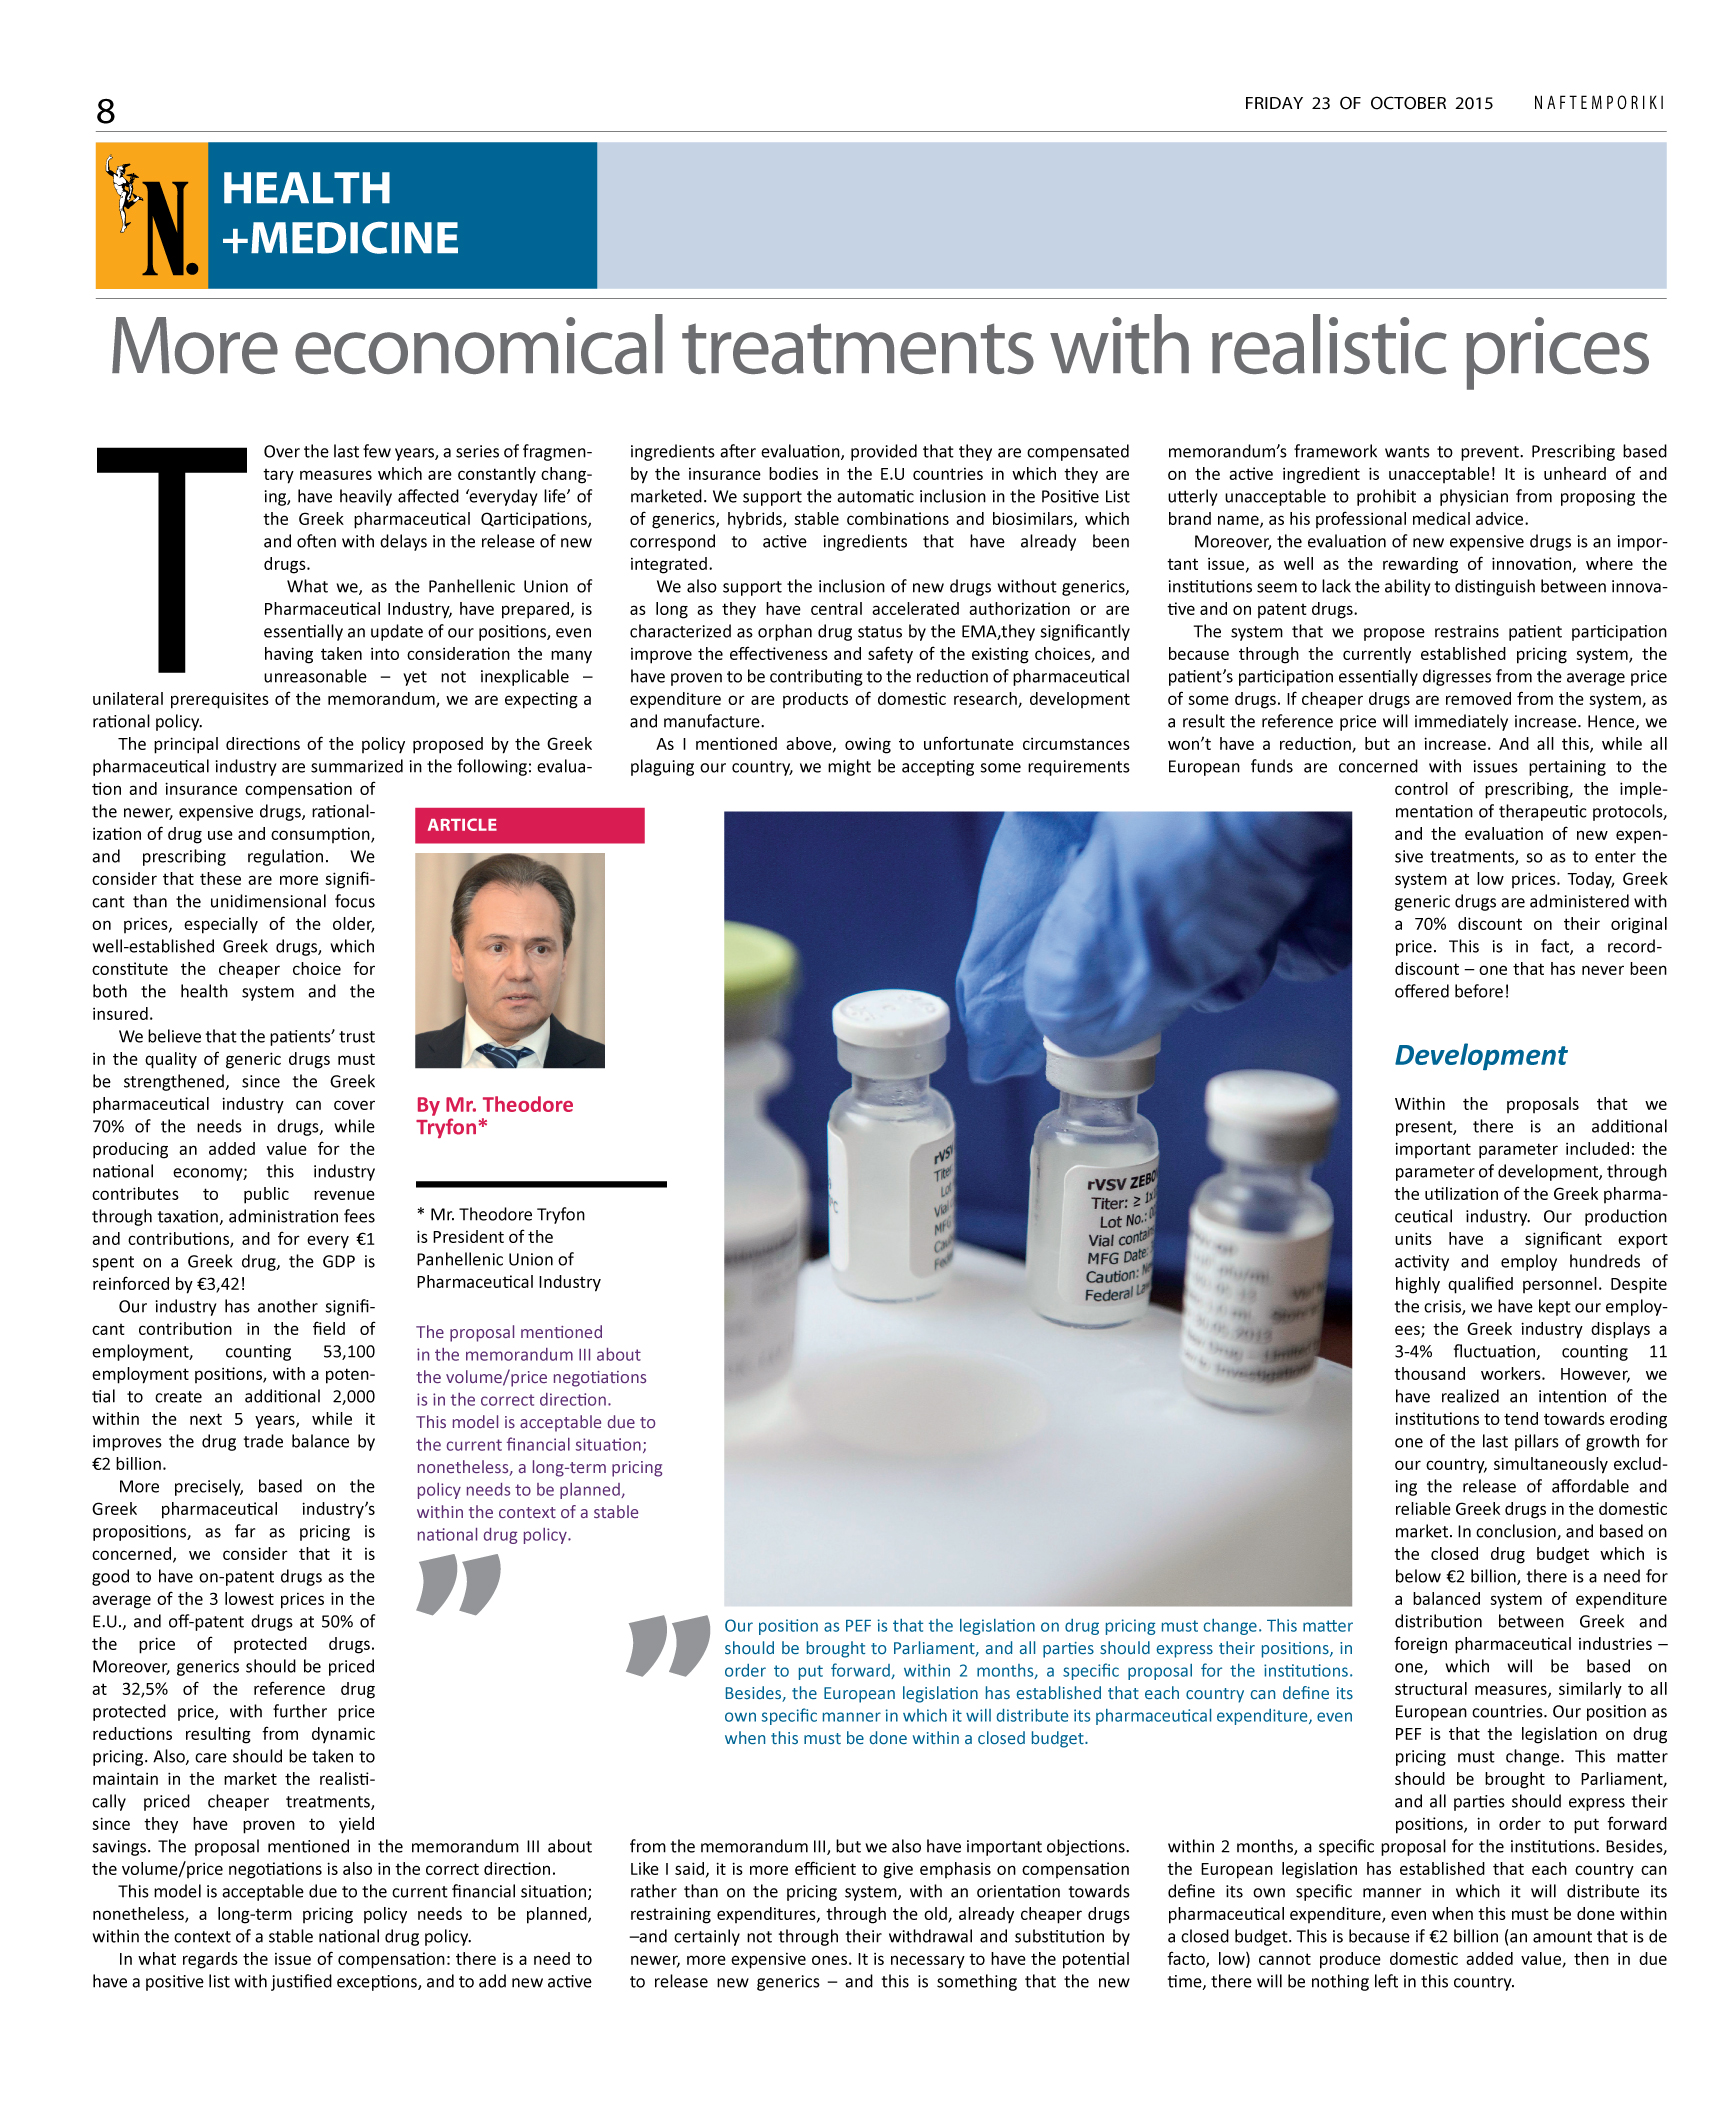 More economical treatments with realistic pricesBy: Mr. Theodore Tryfon